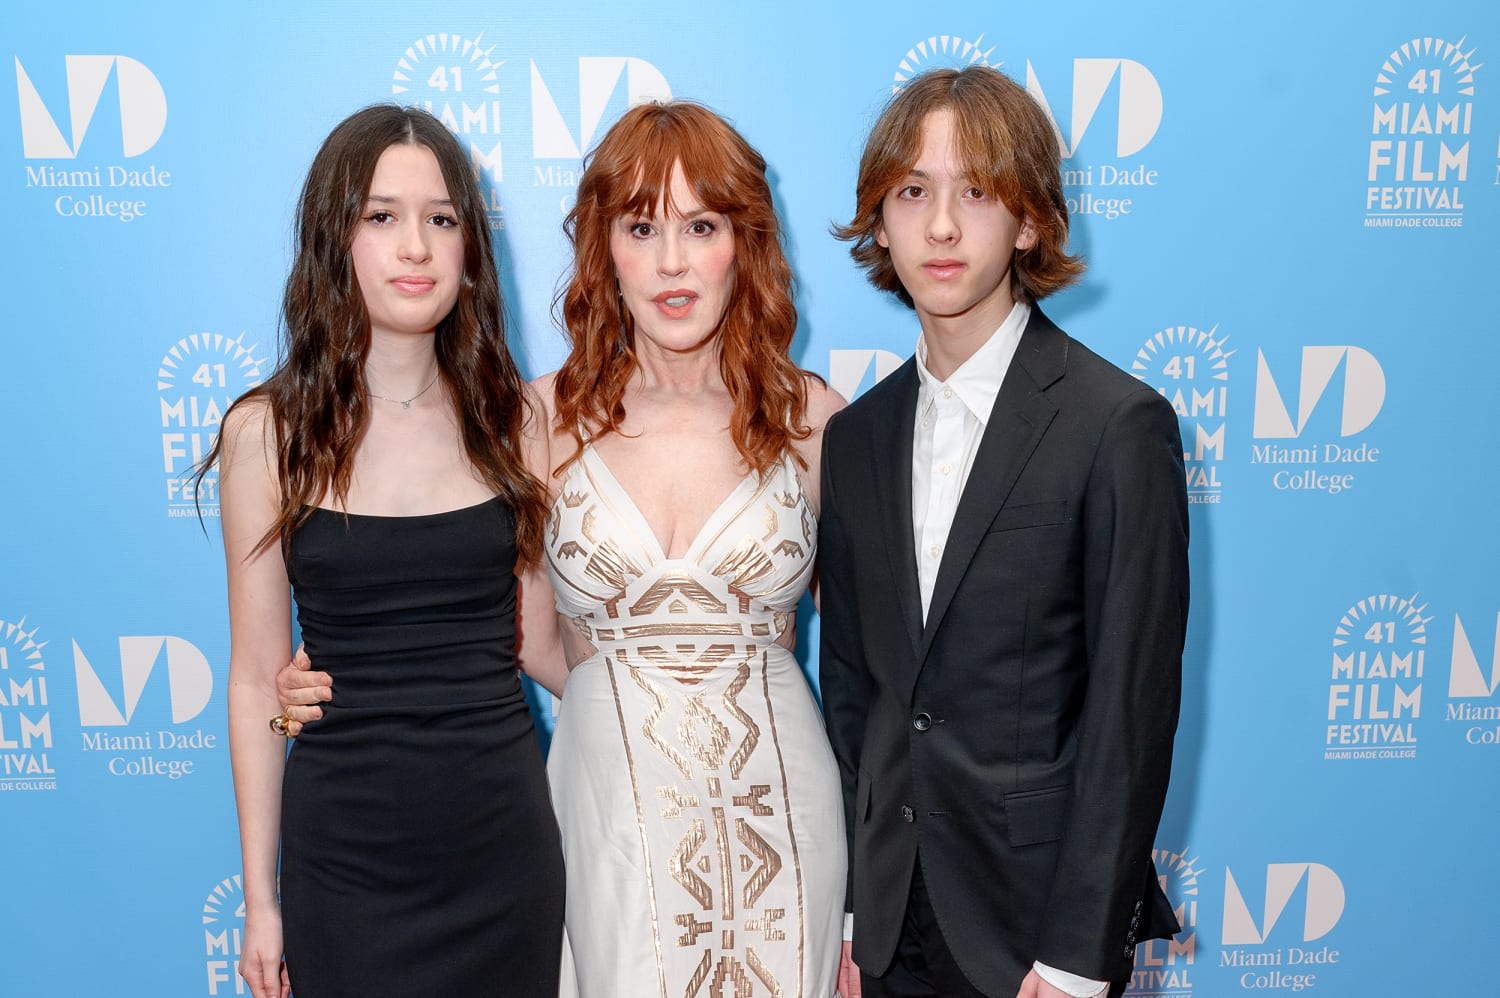 Molly Ringwald is a doting mom in rare snap of her with twins Adele and Roman